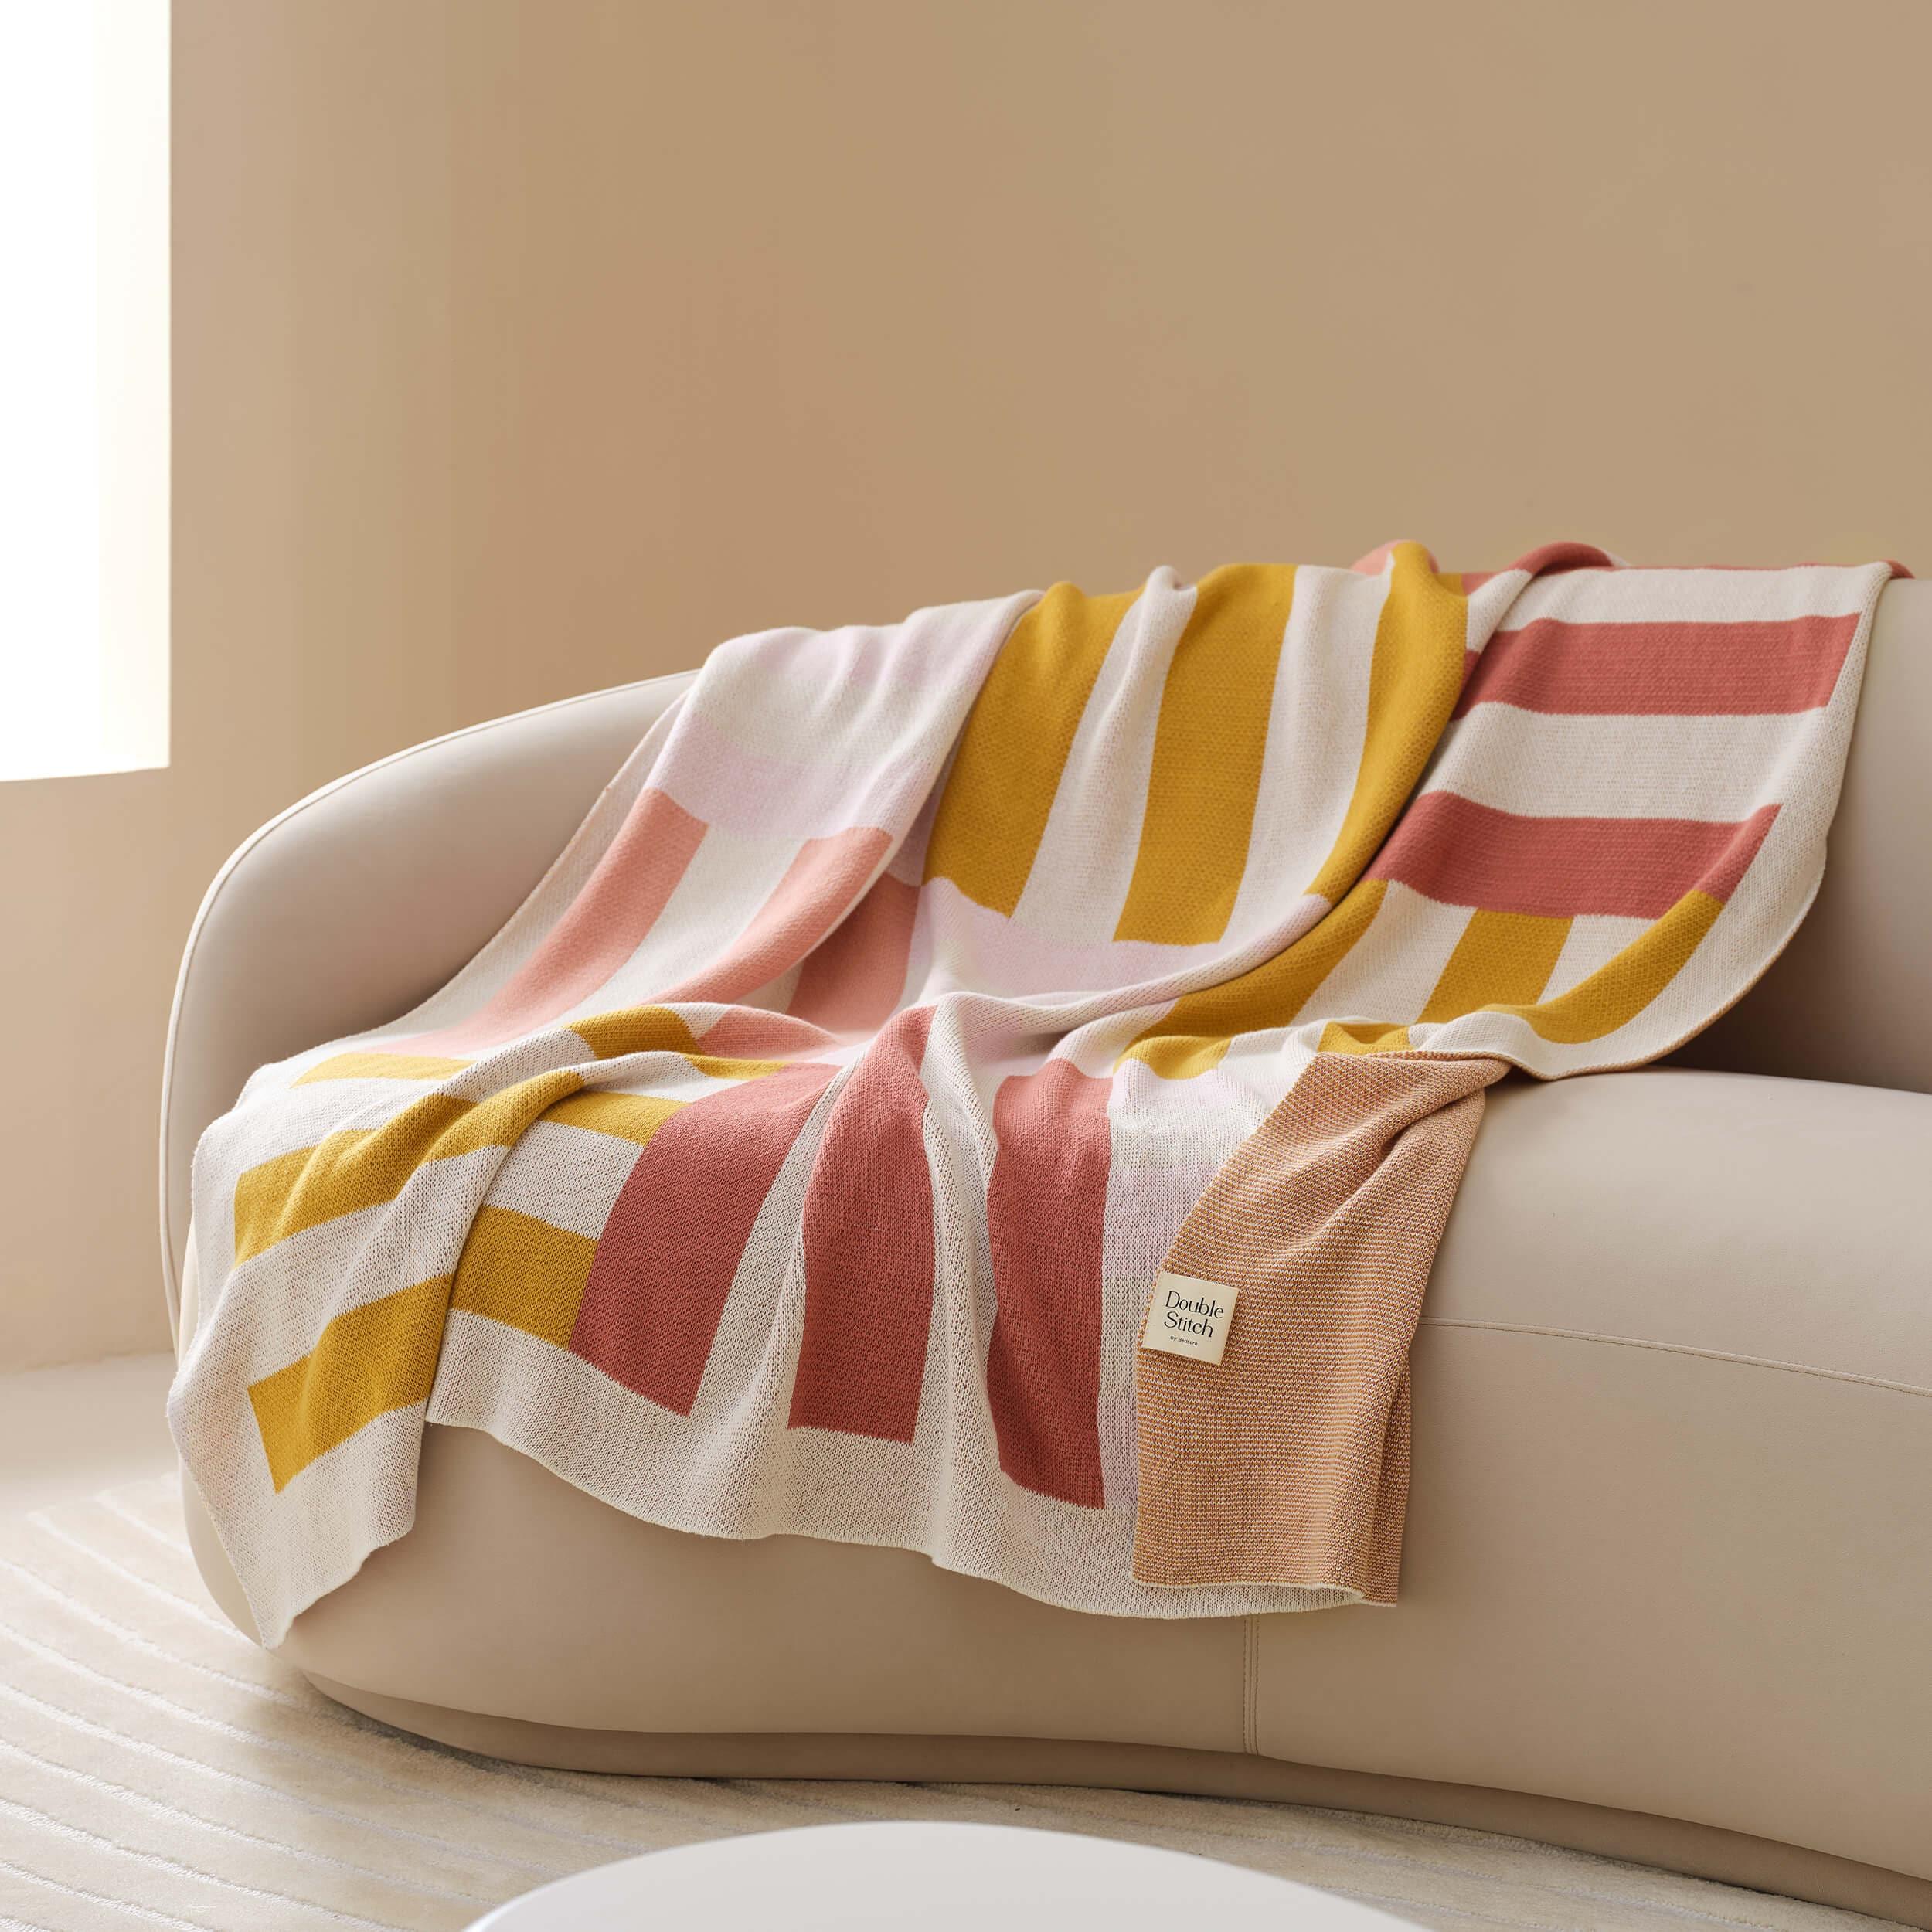 The versatile cotton throw blanket can be used as a decorative accent or for extra warmth during colder months.